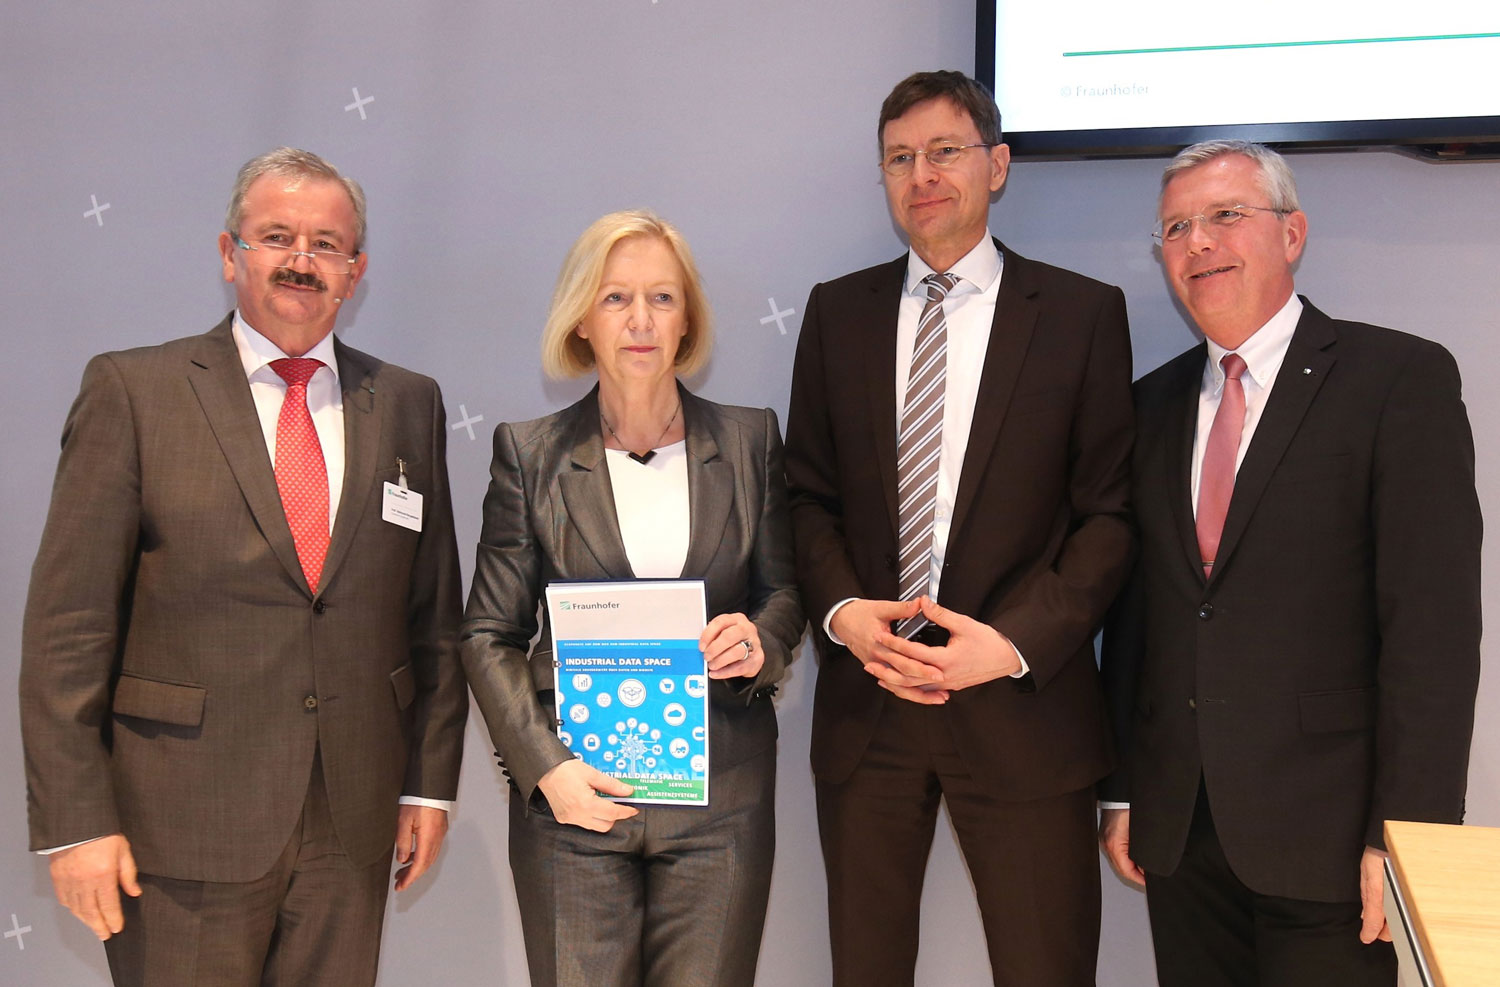 Prof. Reimund Neugebauer, President of the Fraunhofer-Gesellschaft, Prof. Johanna Wanka, Federal Minister of Education and Research, Prof. Stefan Wrobel, Director of the Fraunhofer Institute for Intelligent Analysis and Information Systems IAIS and Prof. Michael ten Hompel, Director of the Fraunhofer Institutes for Material Flow and Logistics IML and for Software and Systems Engineering ISST (from left to right).